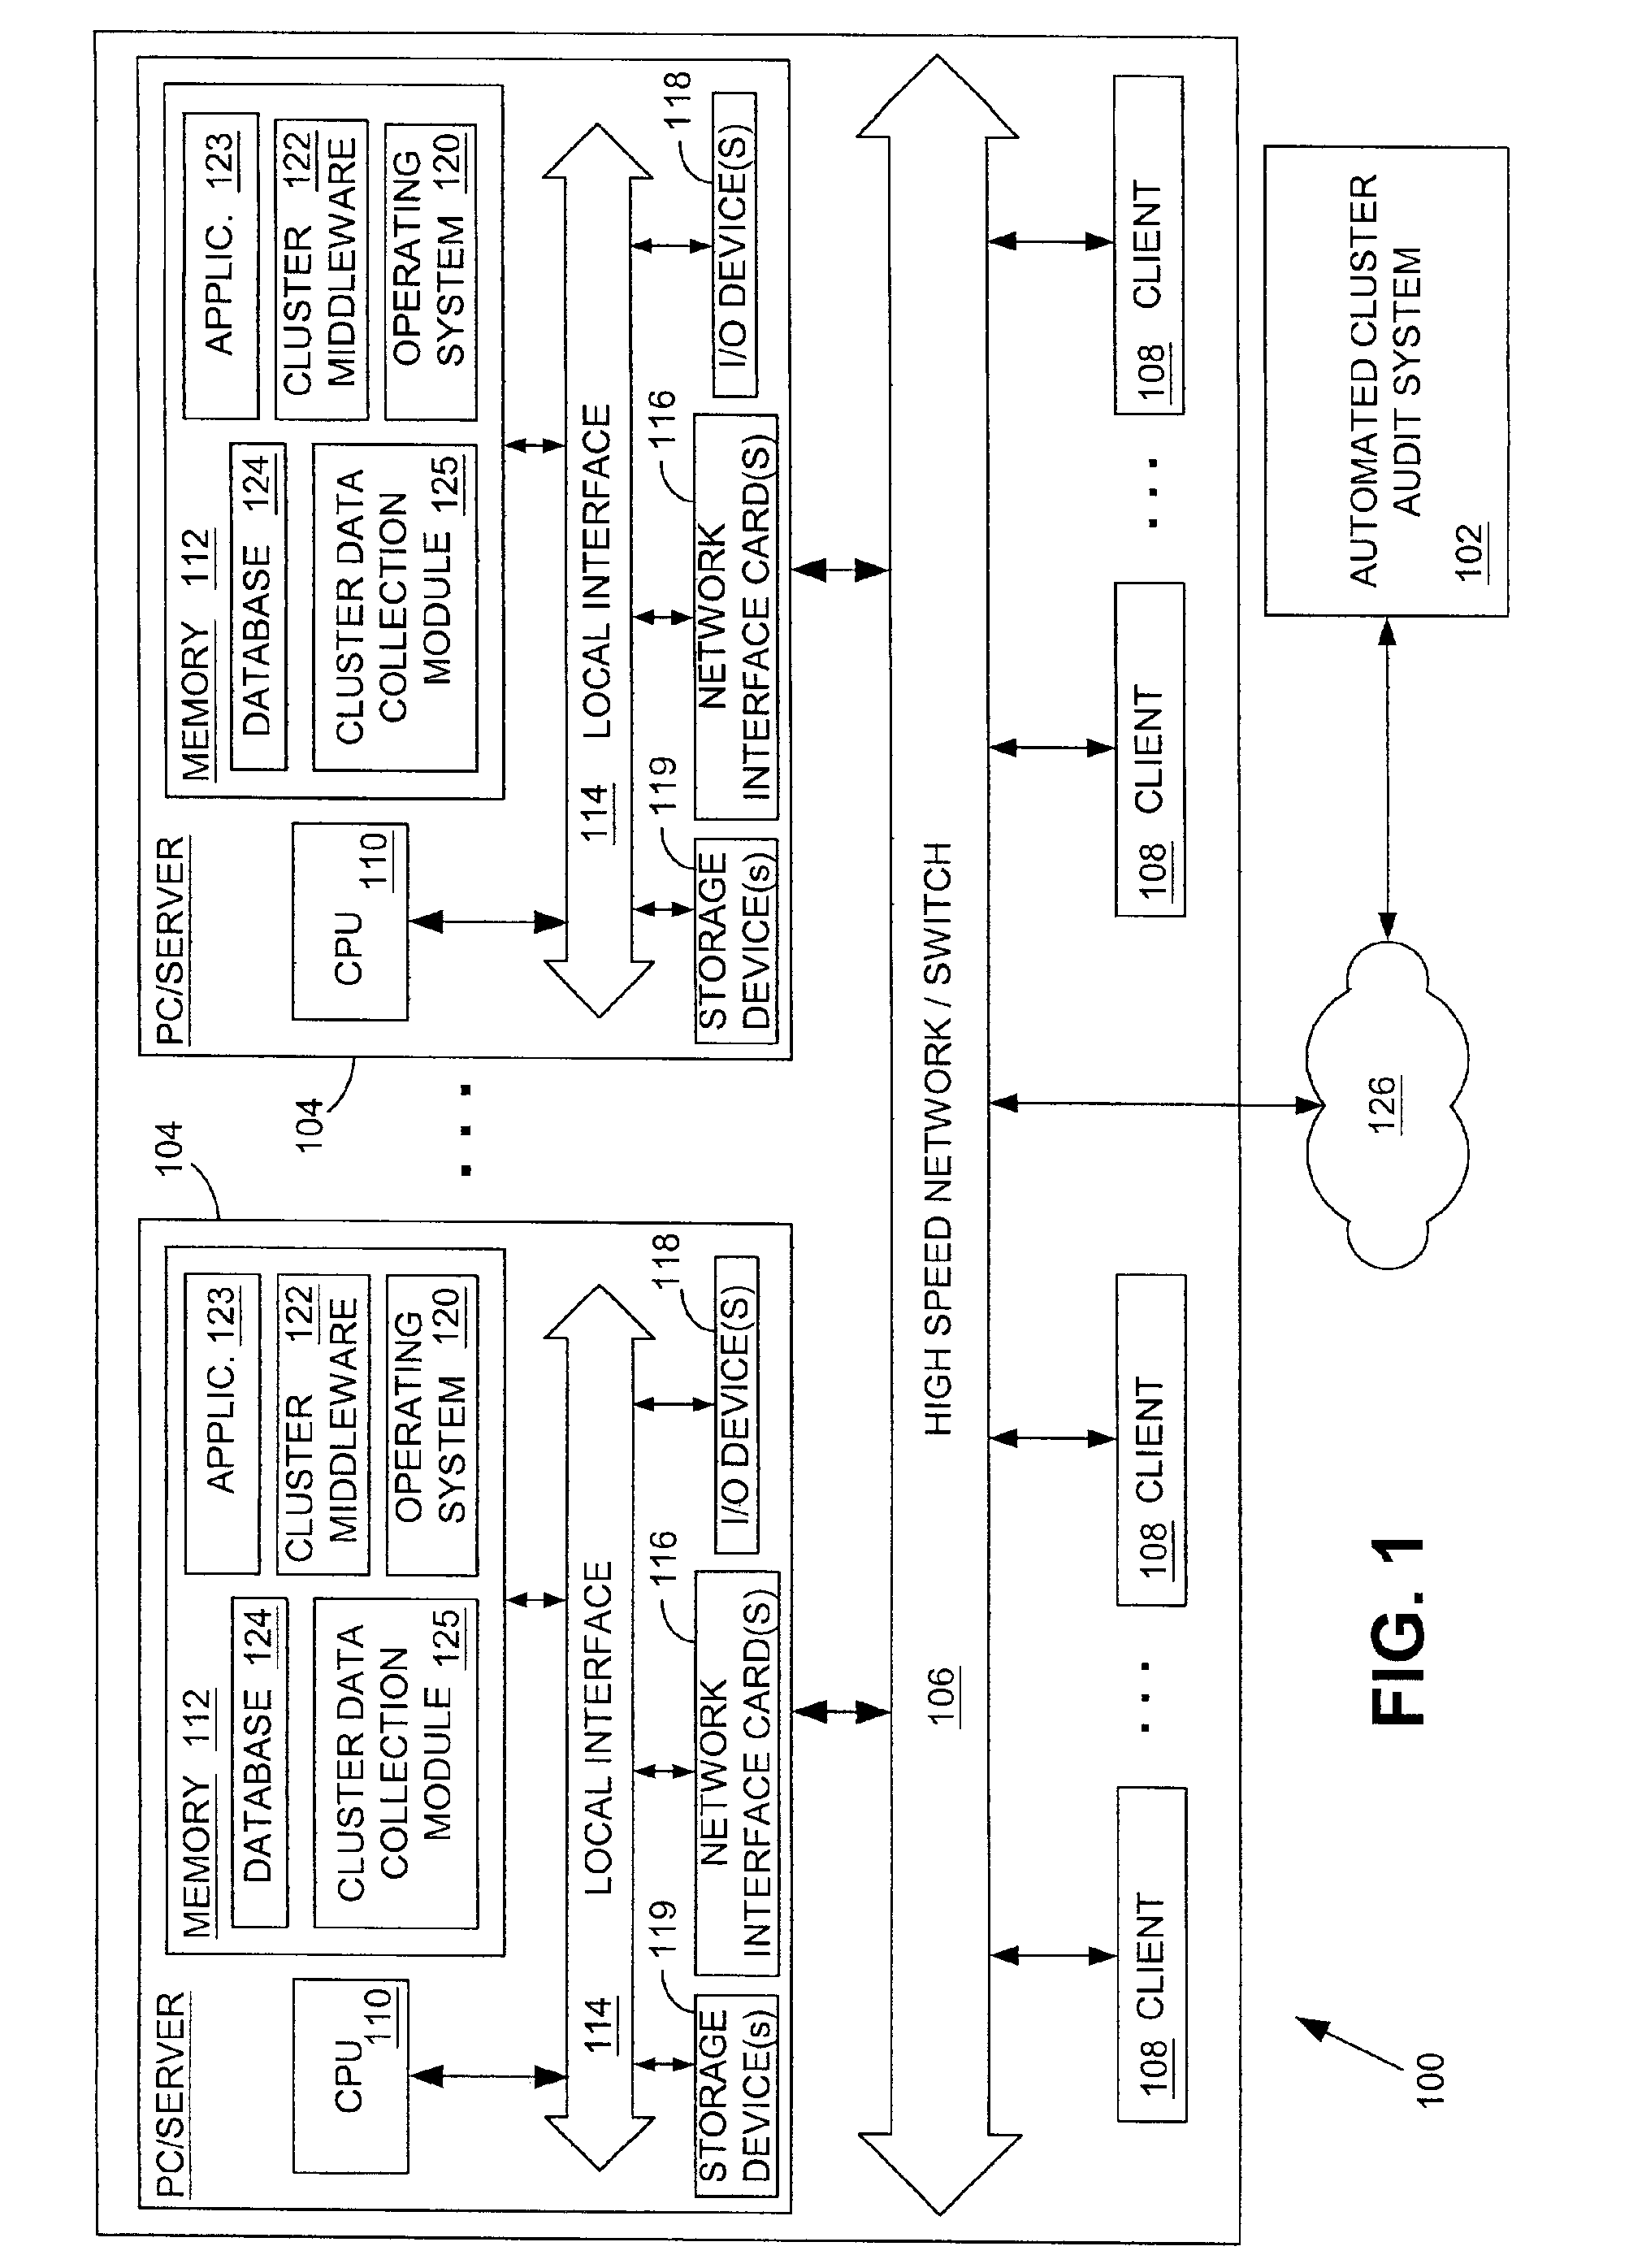 Systems and methods for providing automated diagnostic services for a cluster computer system